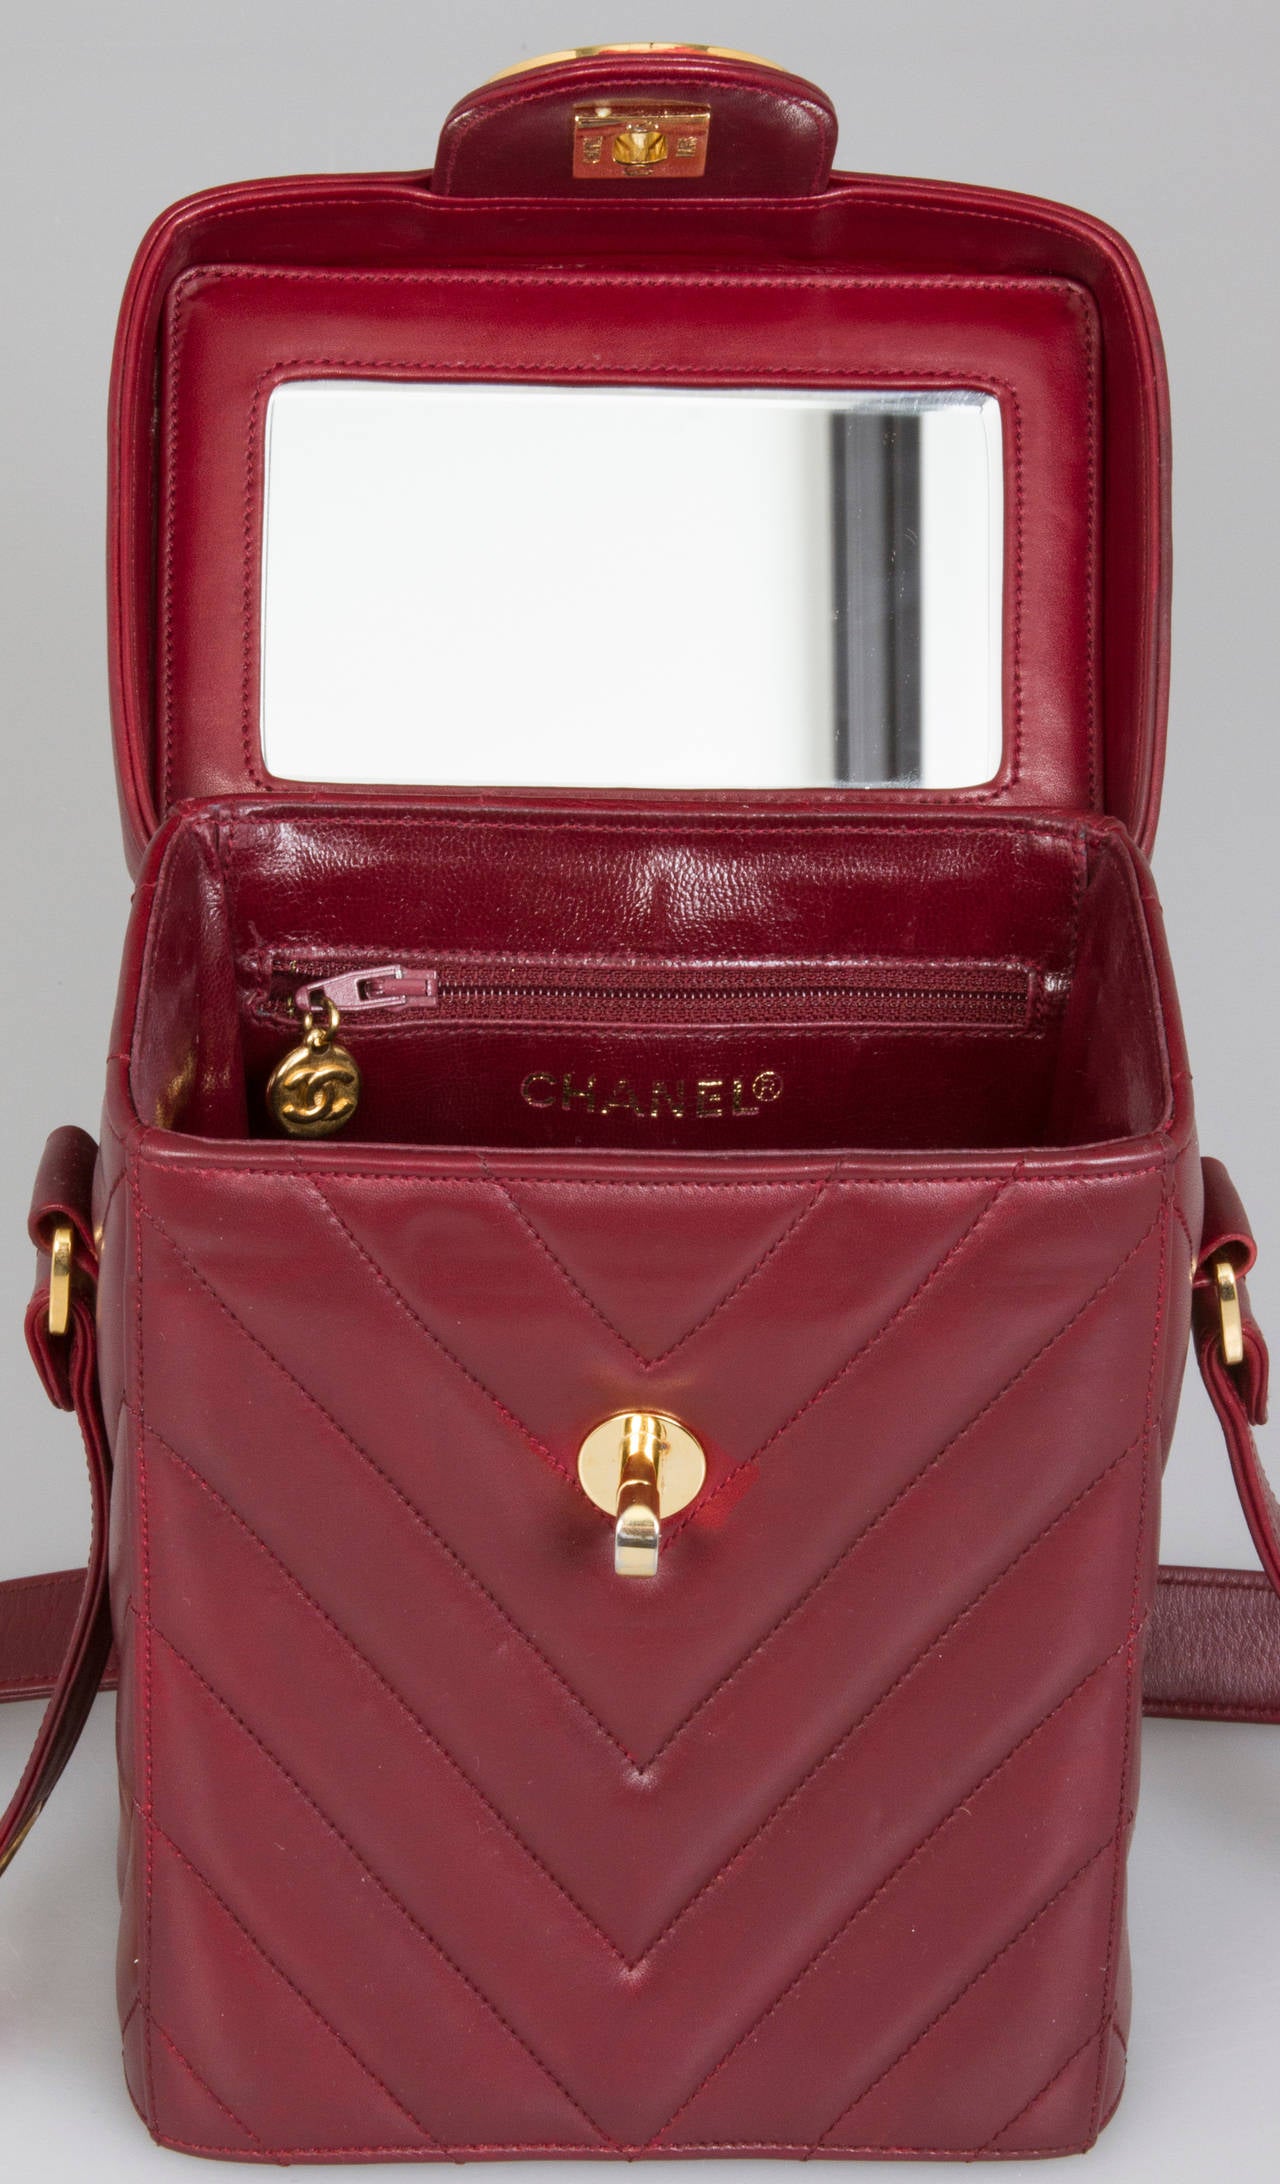 Unusual CHANEL Red Leather Chevron Shoulder Bag 1